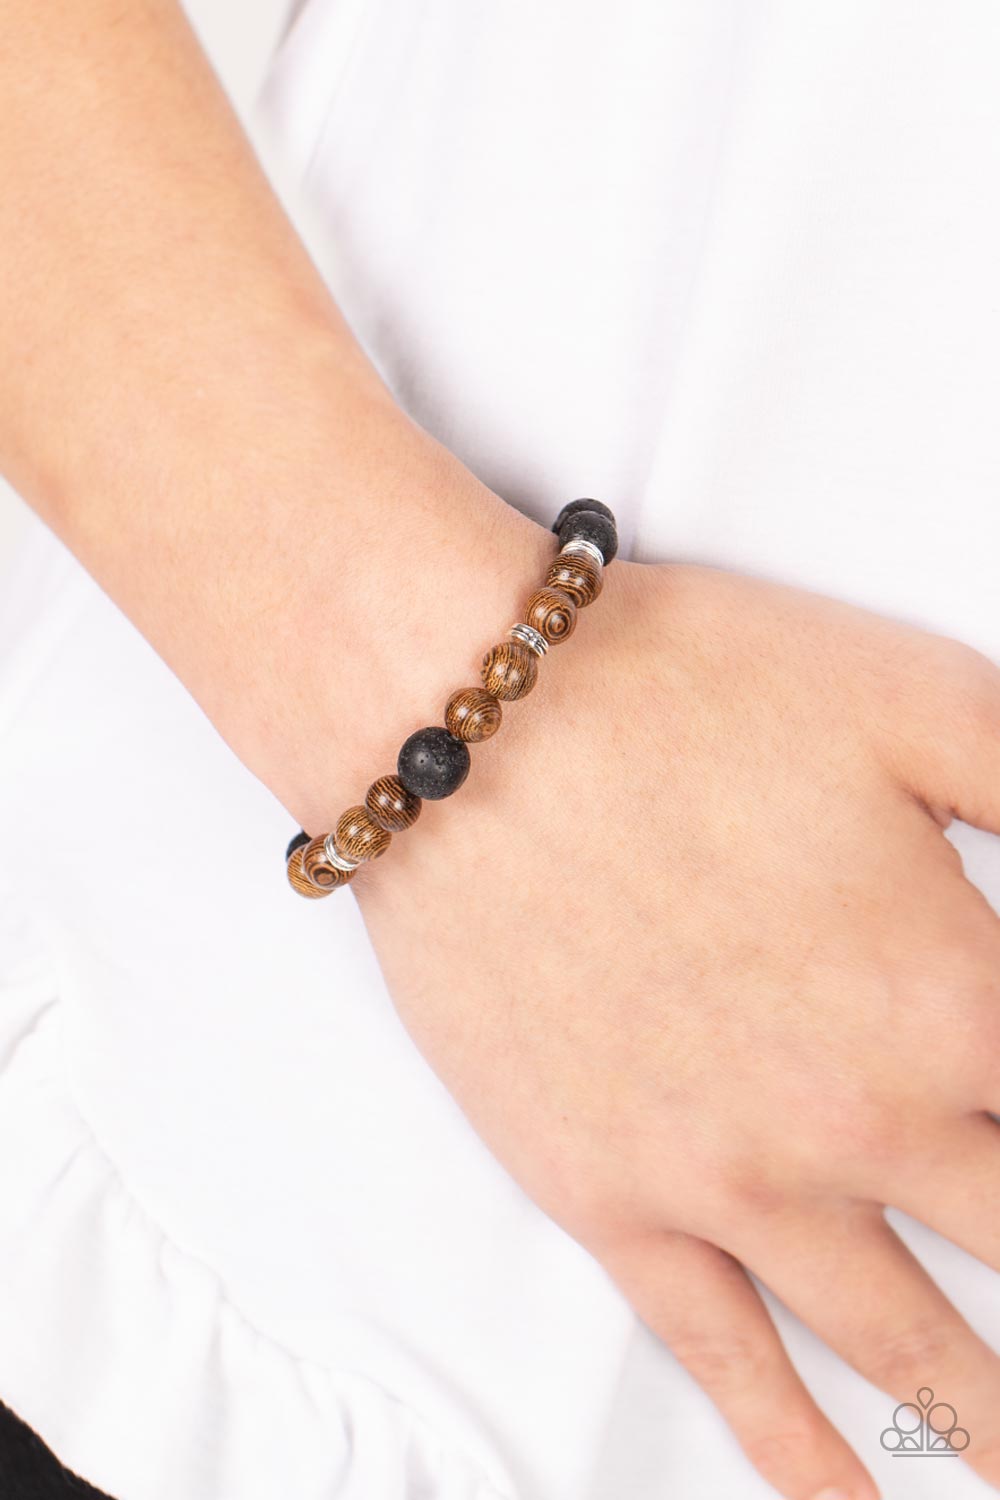 Paparazzi Neutral Zone - Brown Urban Bracelets infused with dainty silver accents, an earthy compilation of brown wooden beads and black lava stone beads are threaded along stretchy bands around the wrist for an urban flair.  Sold as one individual bracelet.